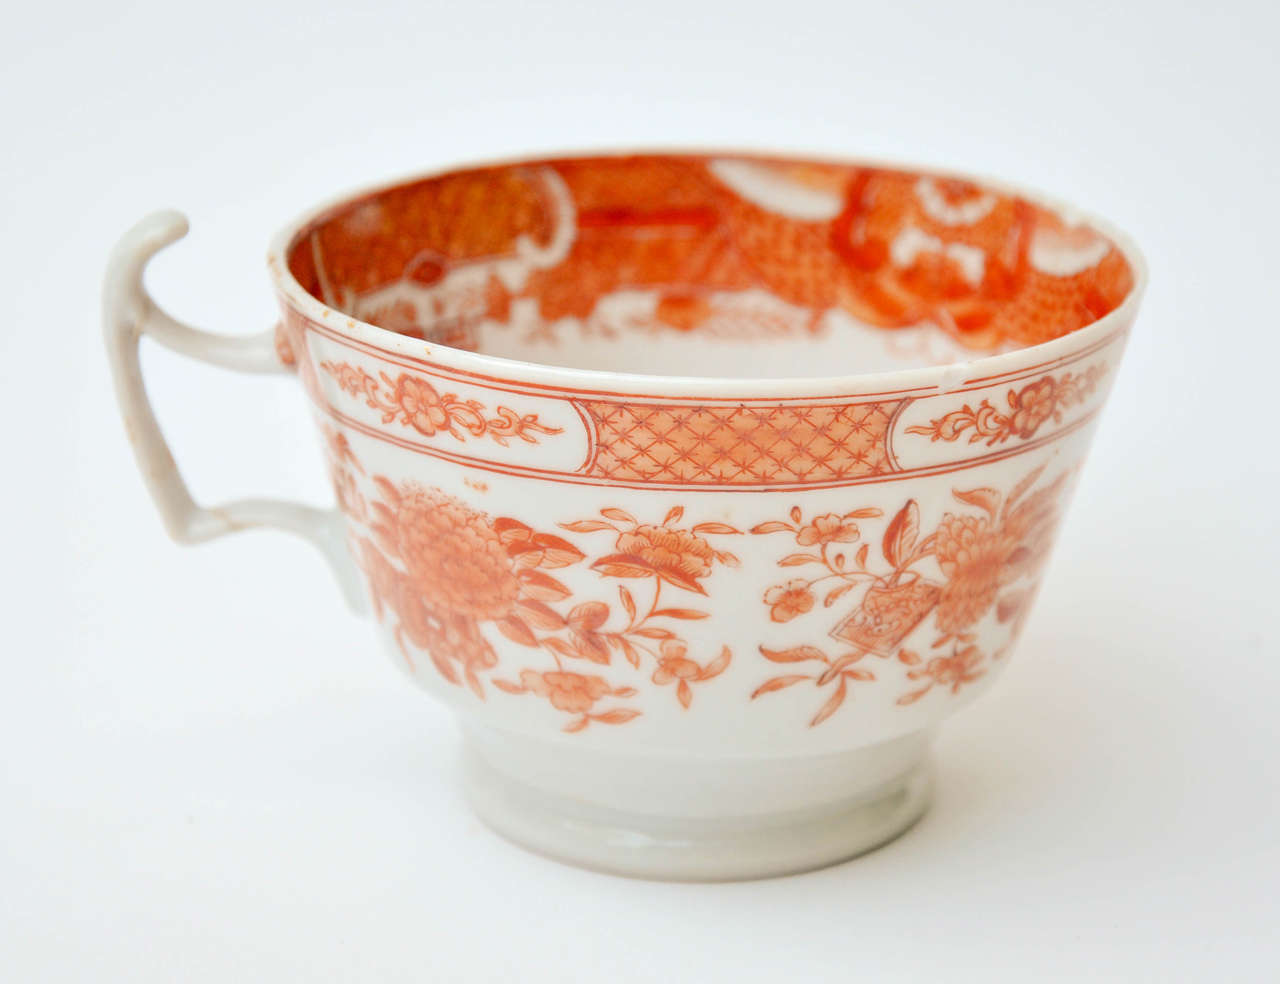 Porcelain Set of Eight Chinese Export Orange Fitzhugh Tea Cups and Saucers, circa 1840